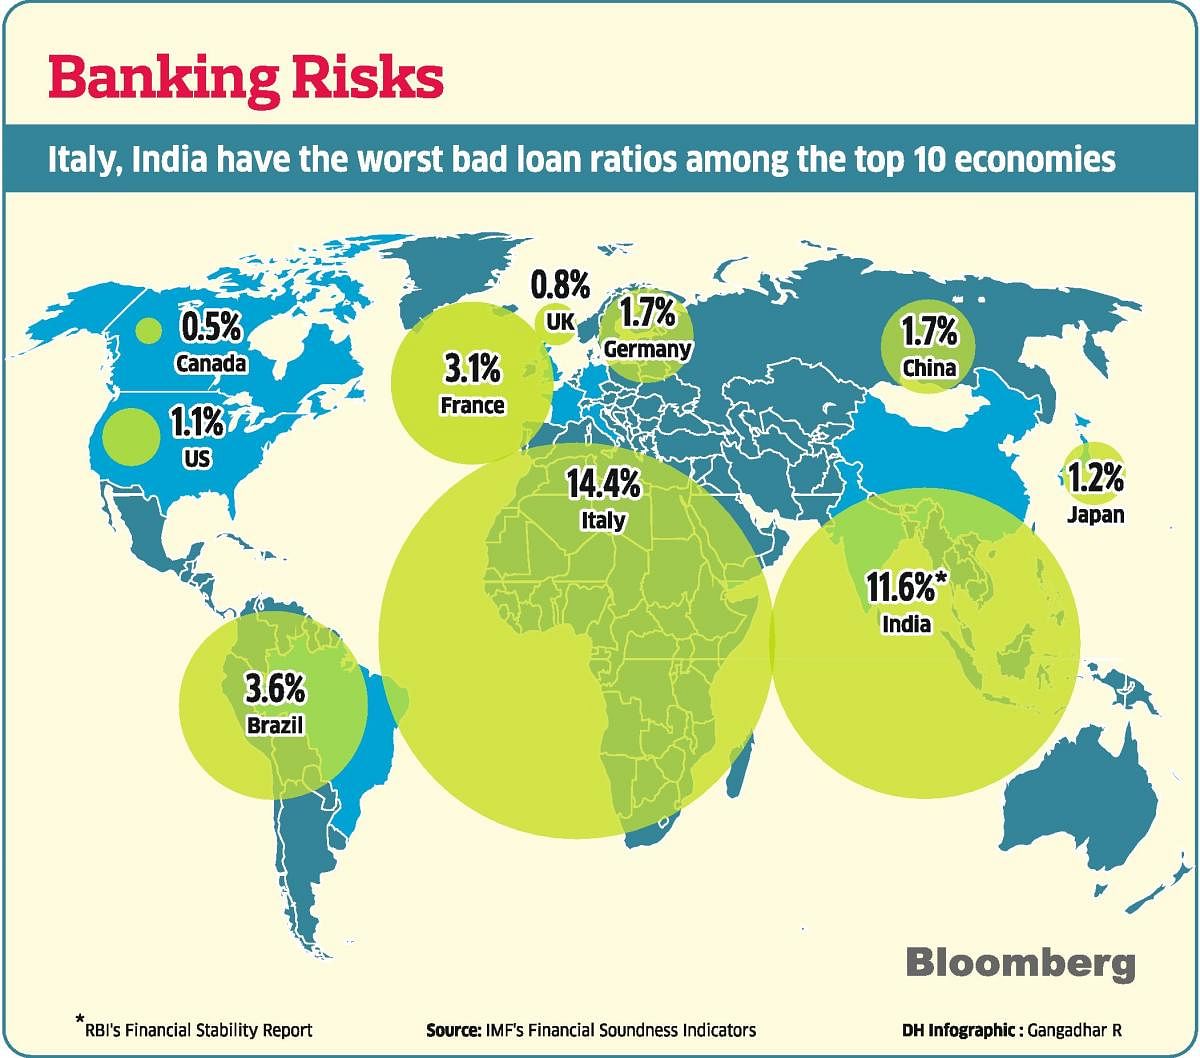 Italy, India have the worst bad loan ratios among the top 10 economies